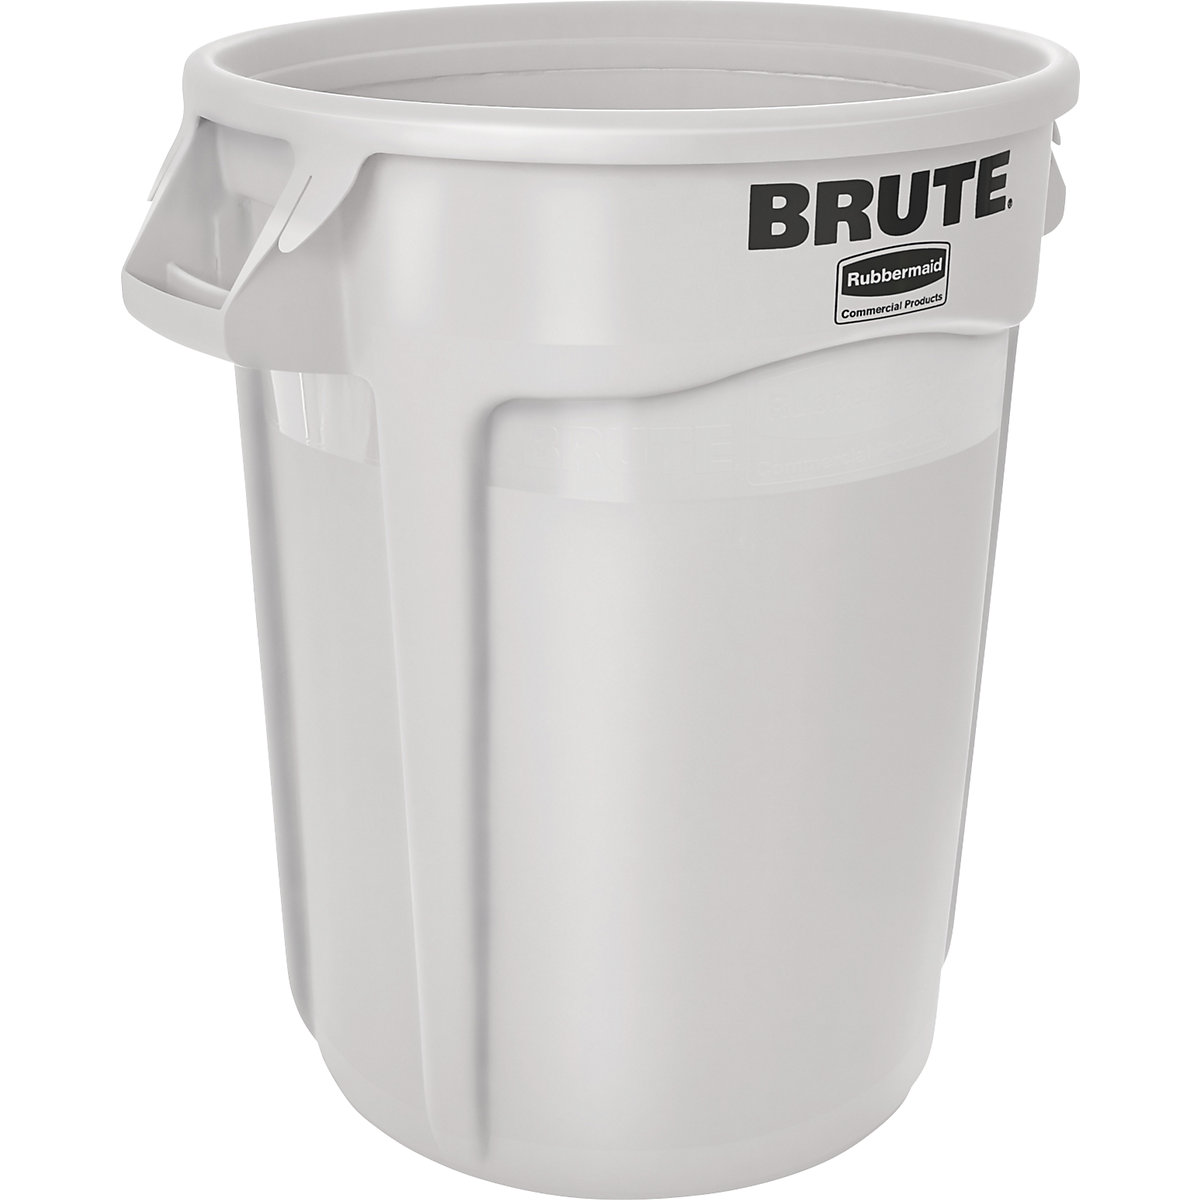 BRUTE® universal container, round – Rubbermaid, capacity 121 l, white-12